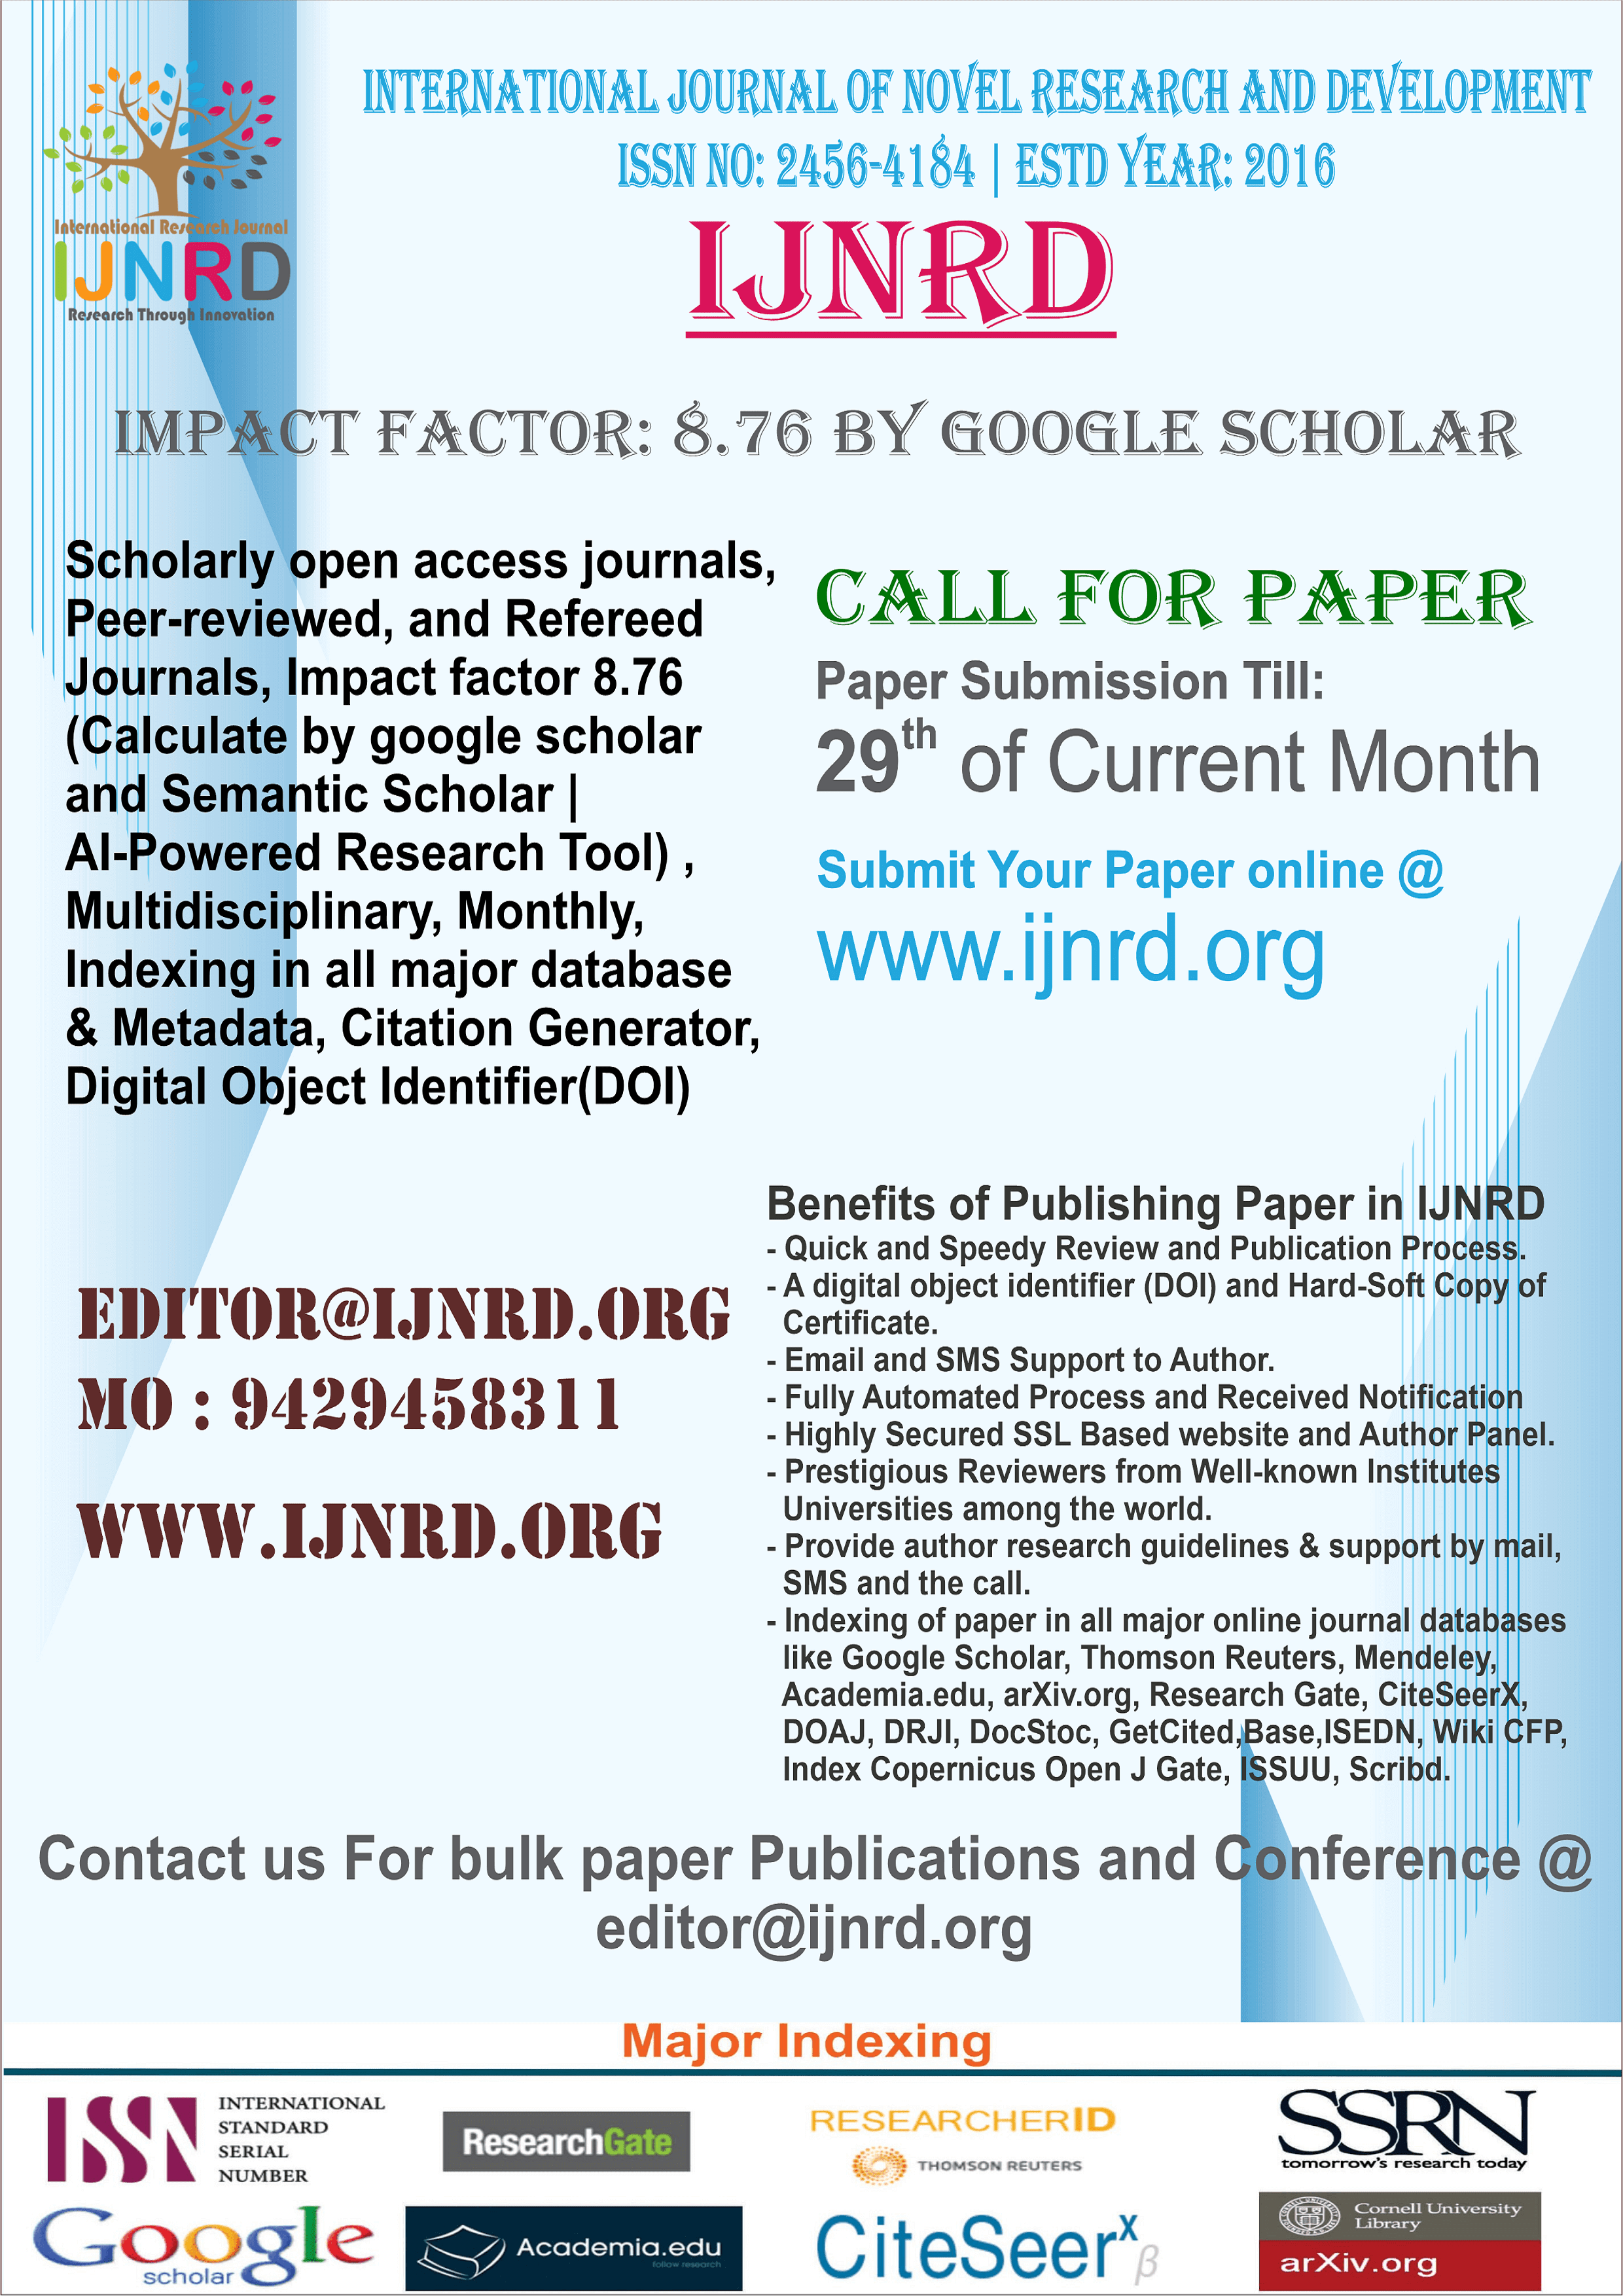 international journal of experimental research and review scimago